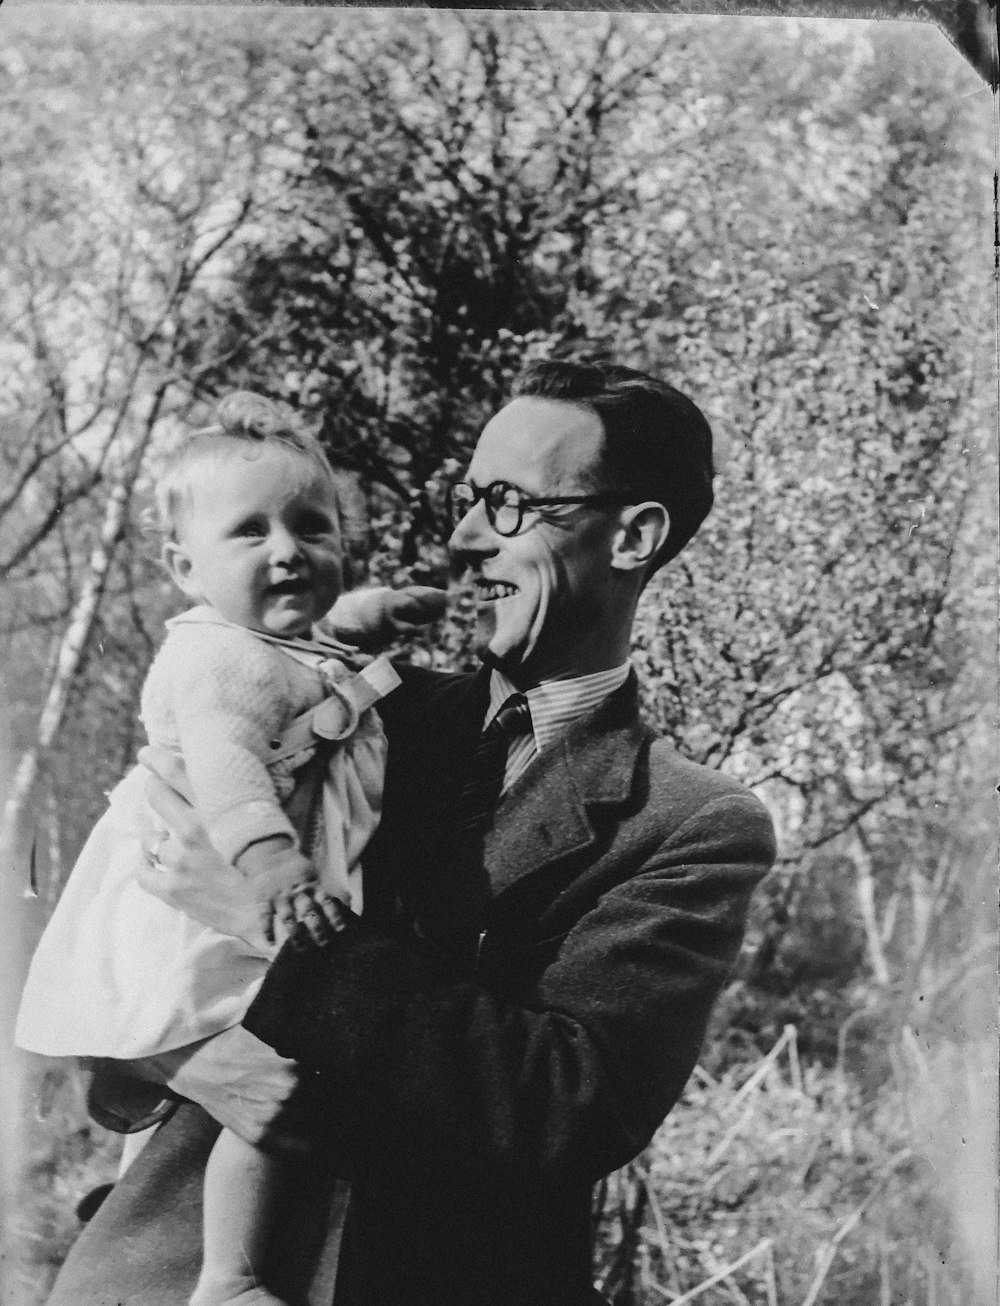 vintage photo of man holding a baby